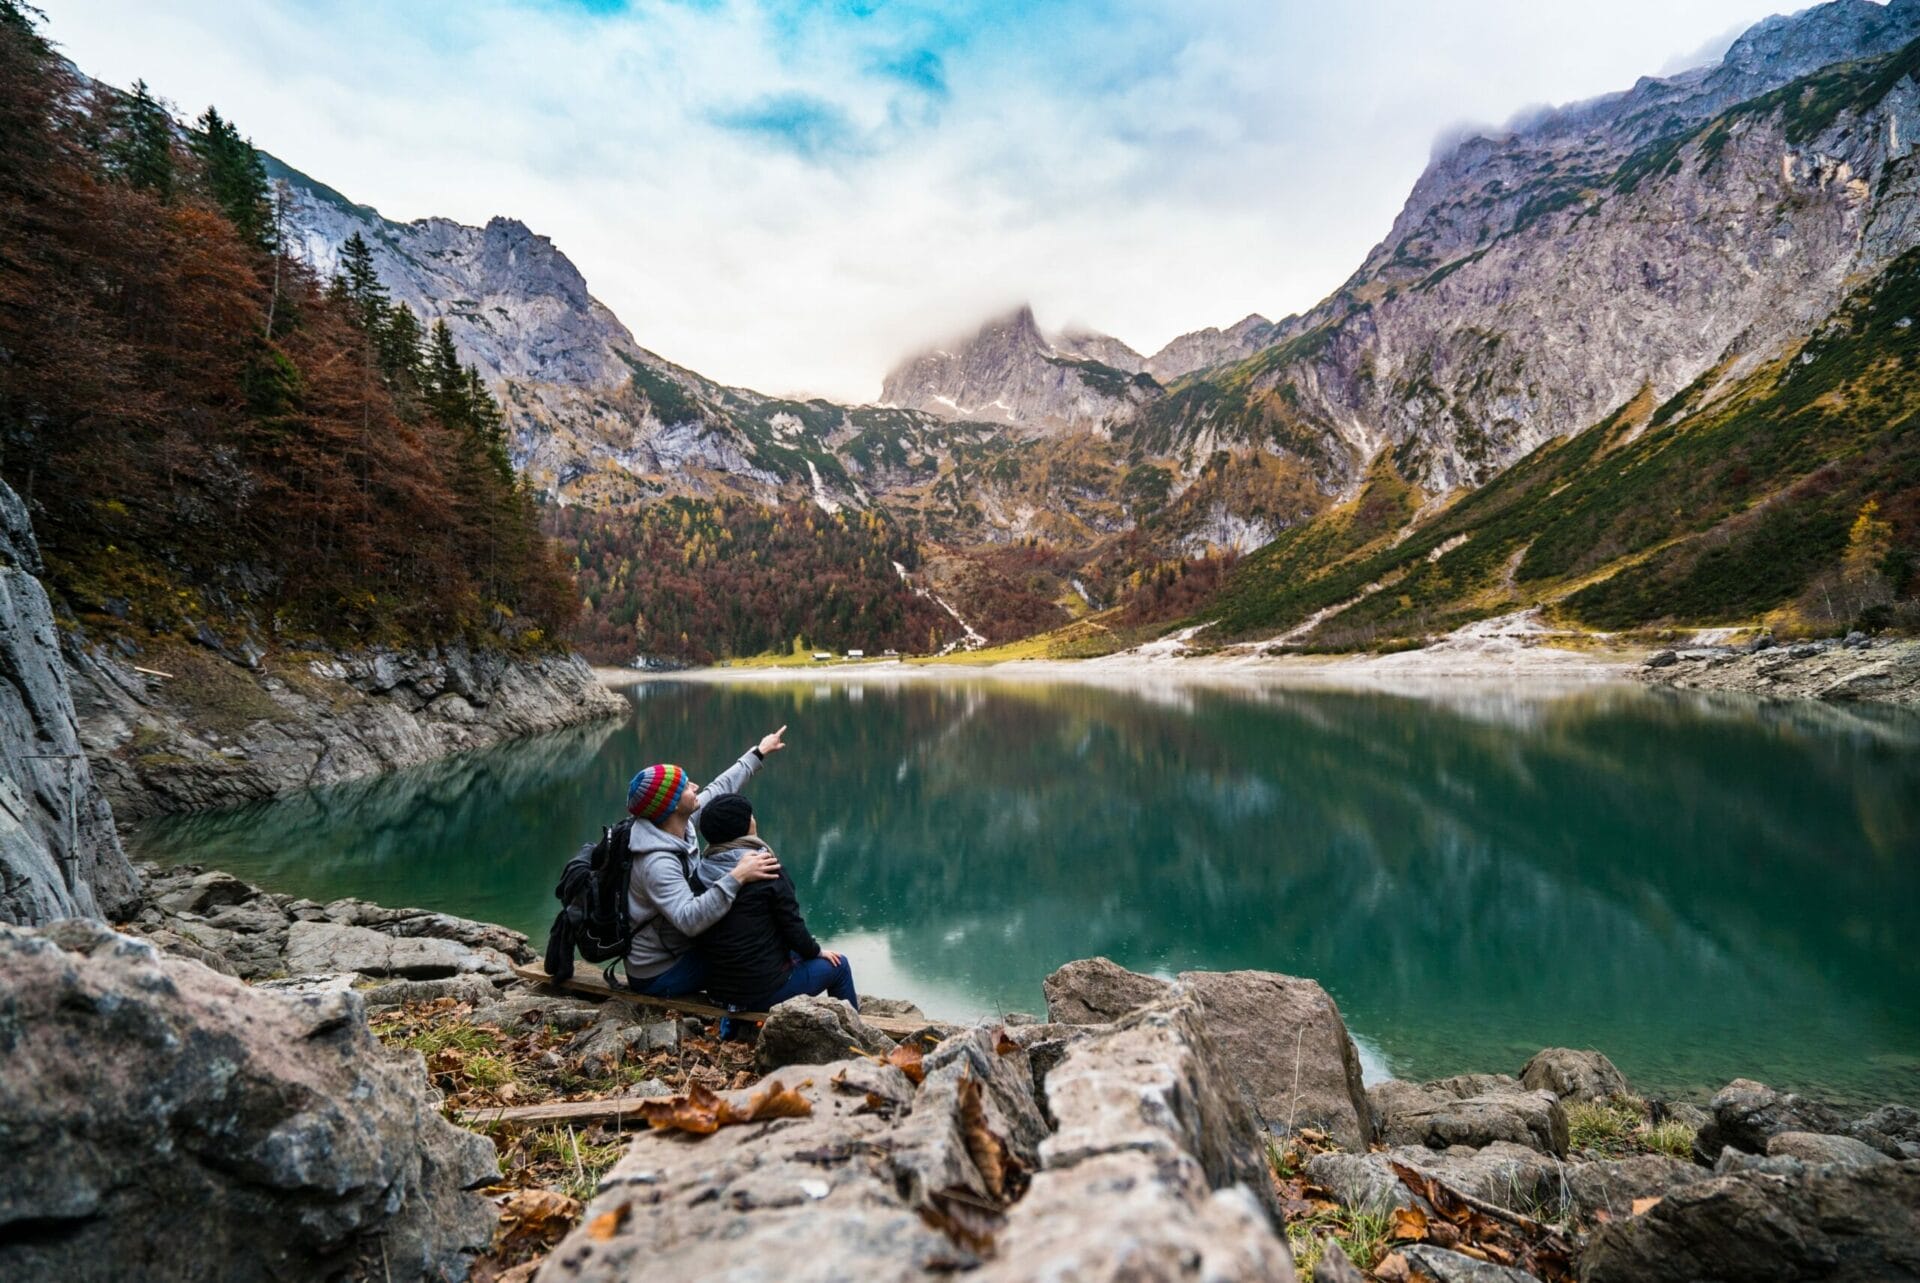 Image of a couple viewing a lake surrounded by mountains